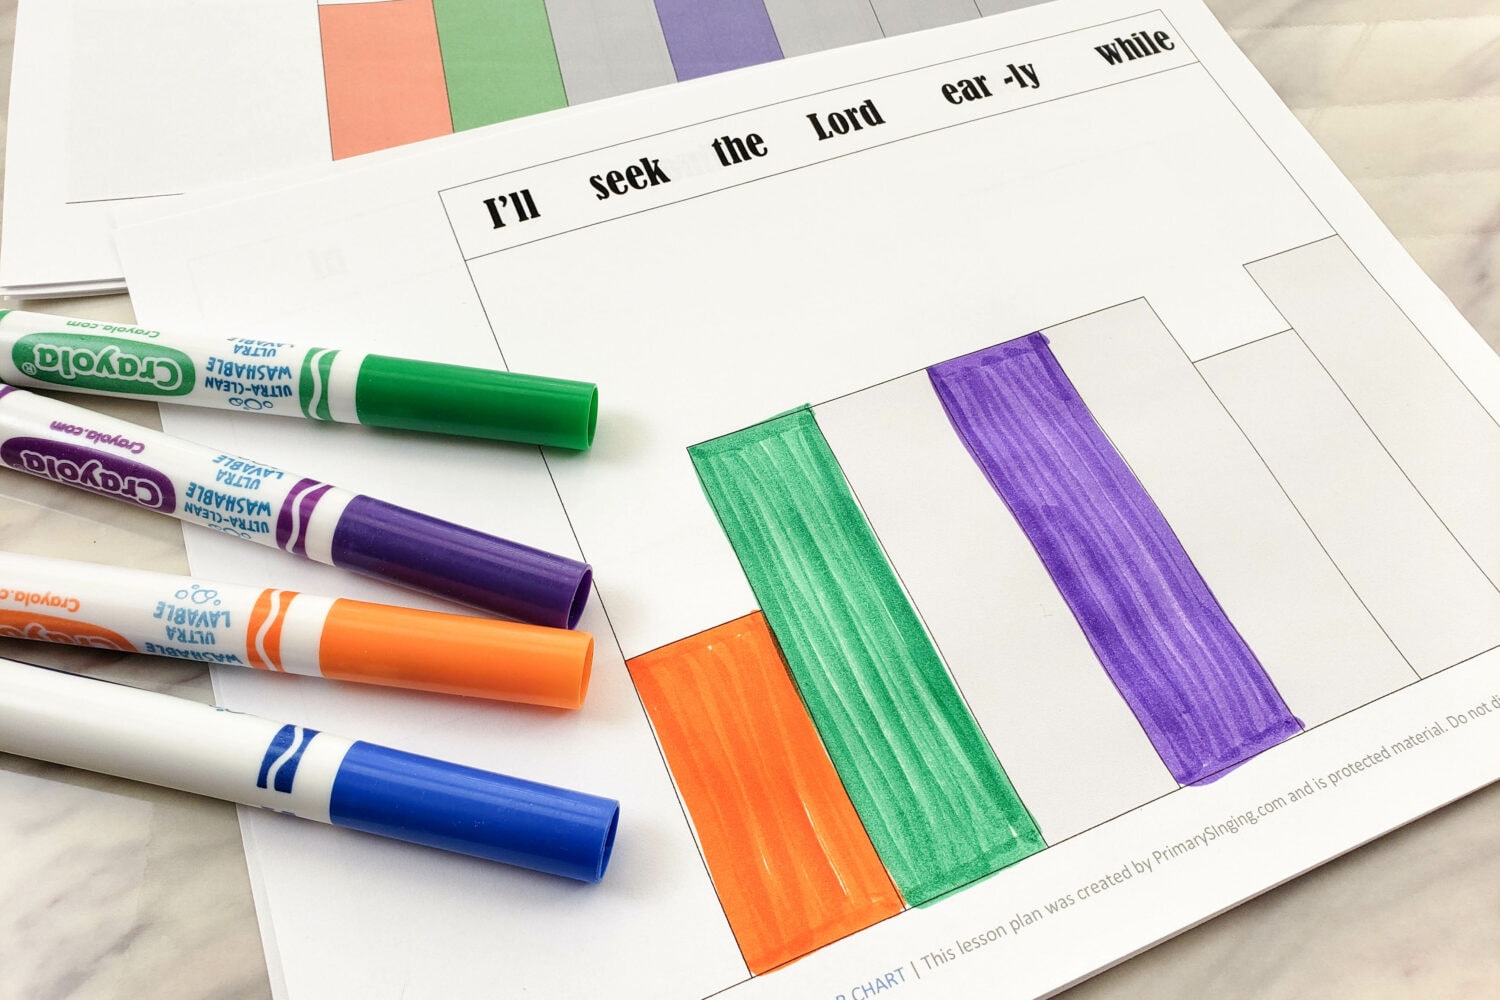 Seek the Lord early coloring bar chart fun singing time idea for LDS Primary music leaders